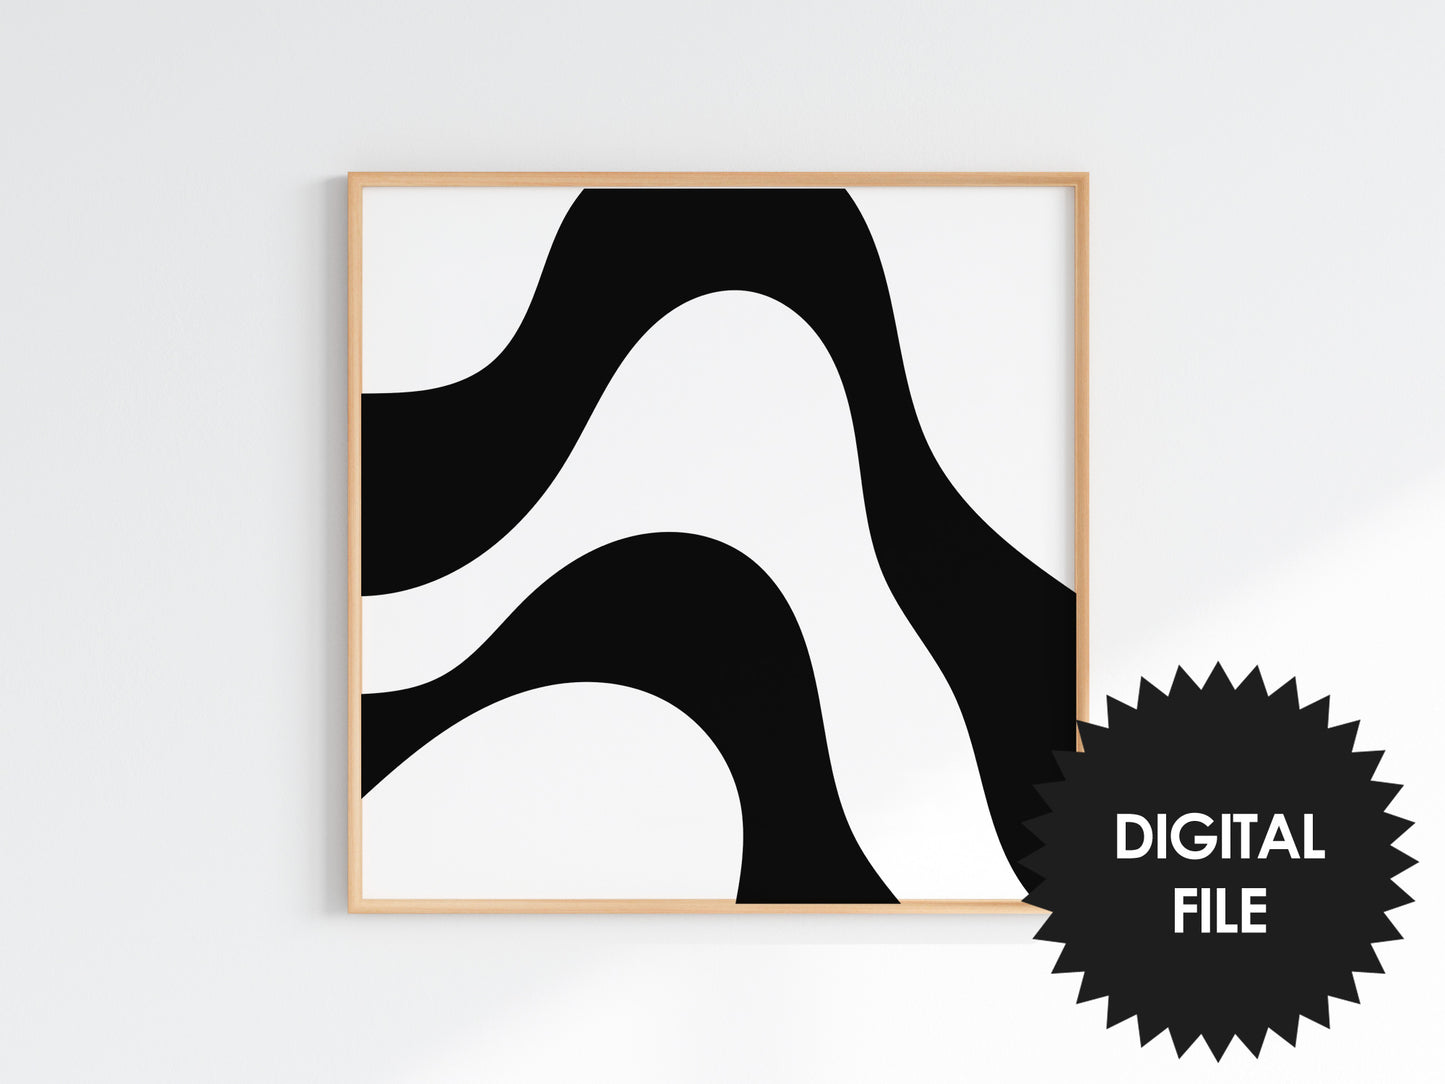 Wiggle Lines Abstract Art Print, Set of 3, Black & White Wall Art, Digital Art Poster Download, Modern Square Art Prints, Print Up To 20x20inch